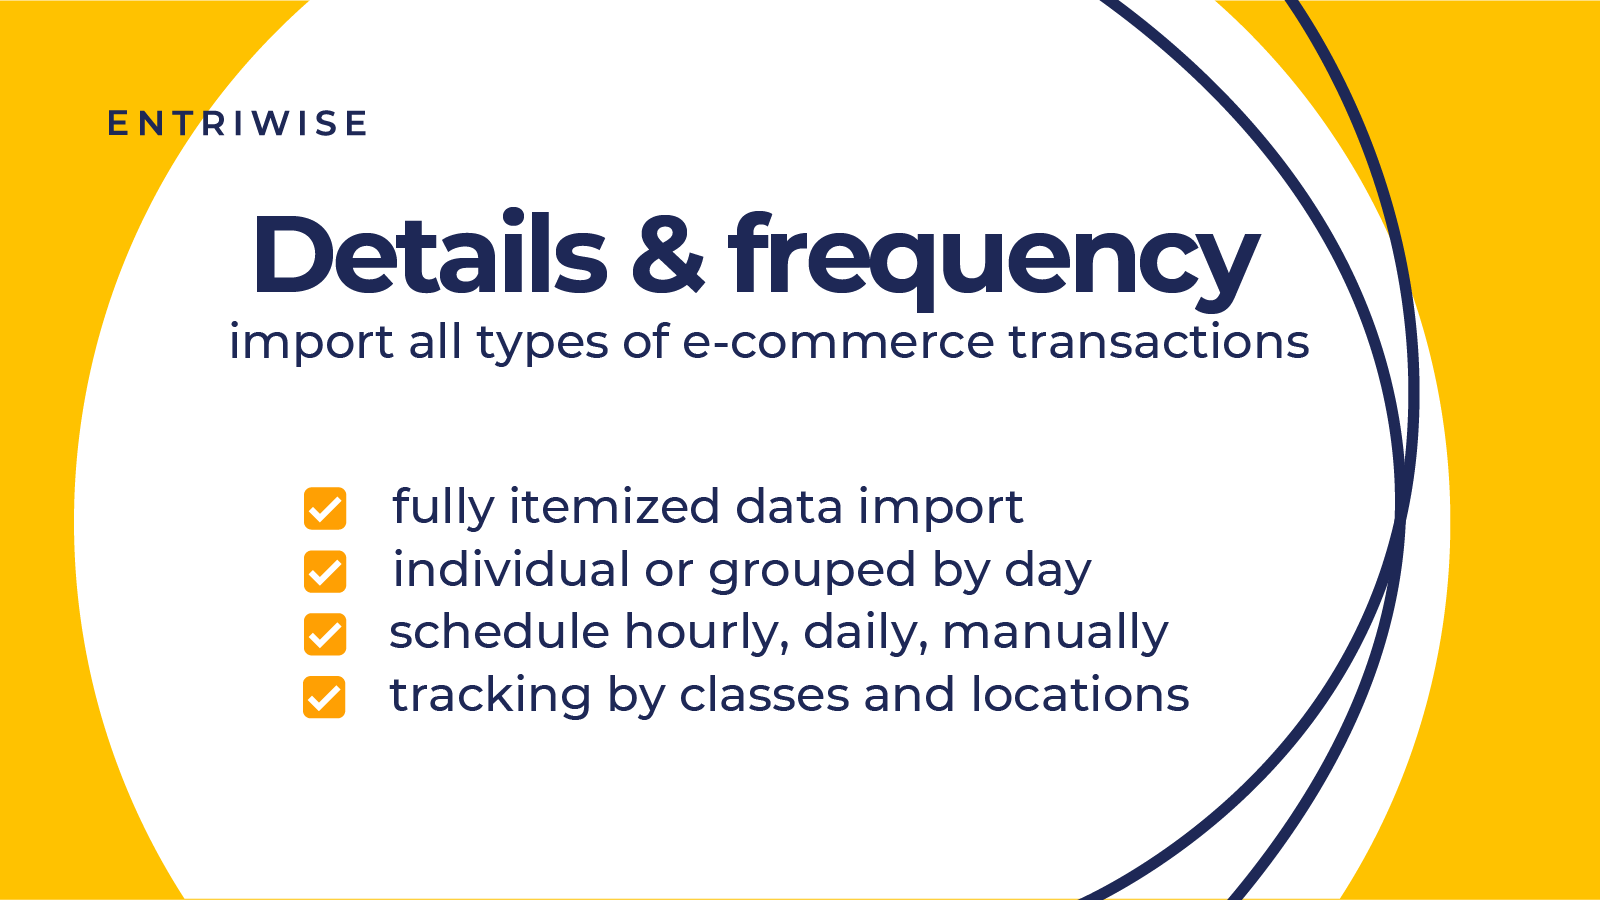 Data Import: details and frequency